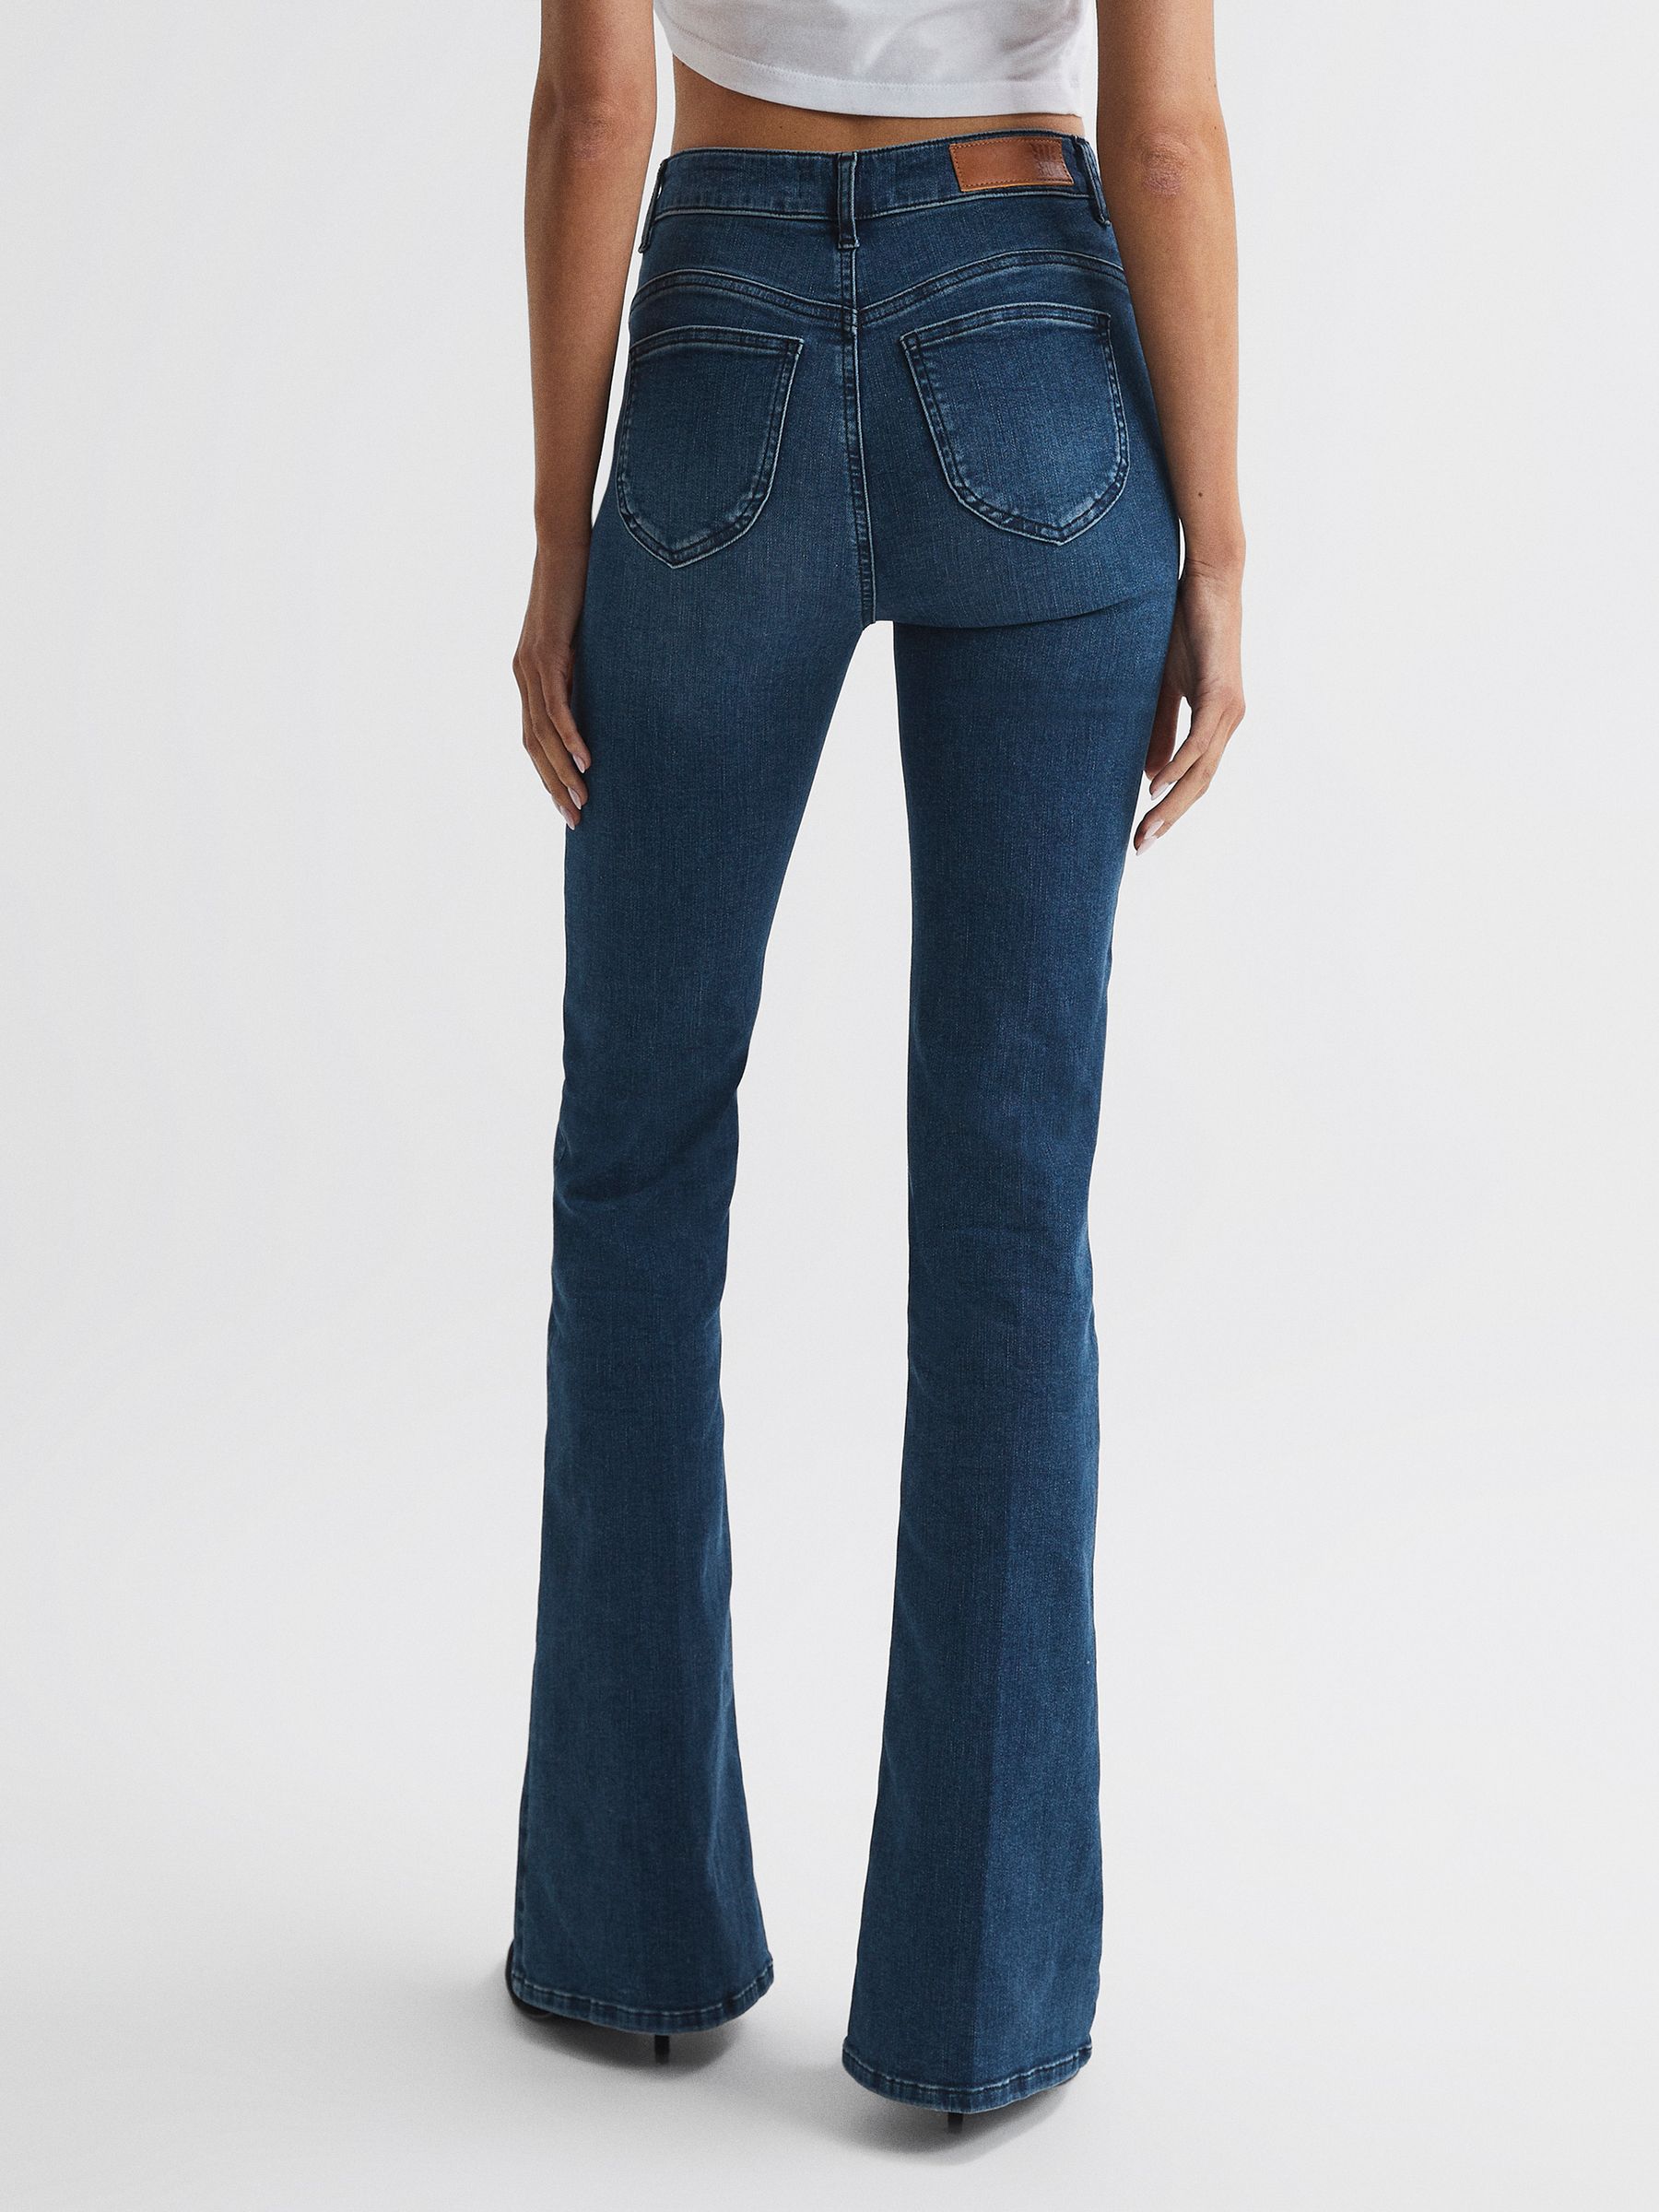 Reiss Perry Contour High Rise Flared Jeans - REISS